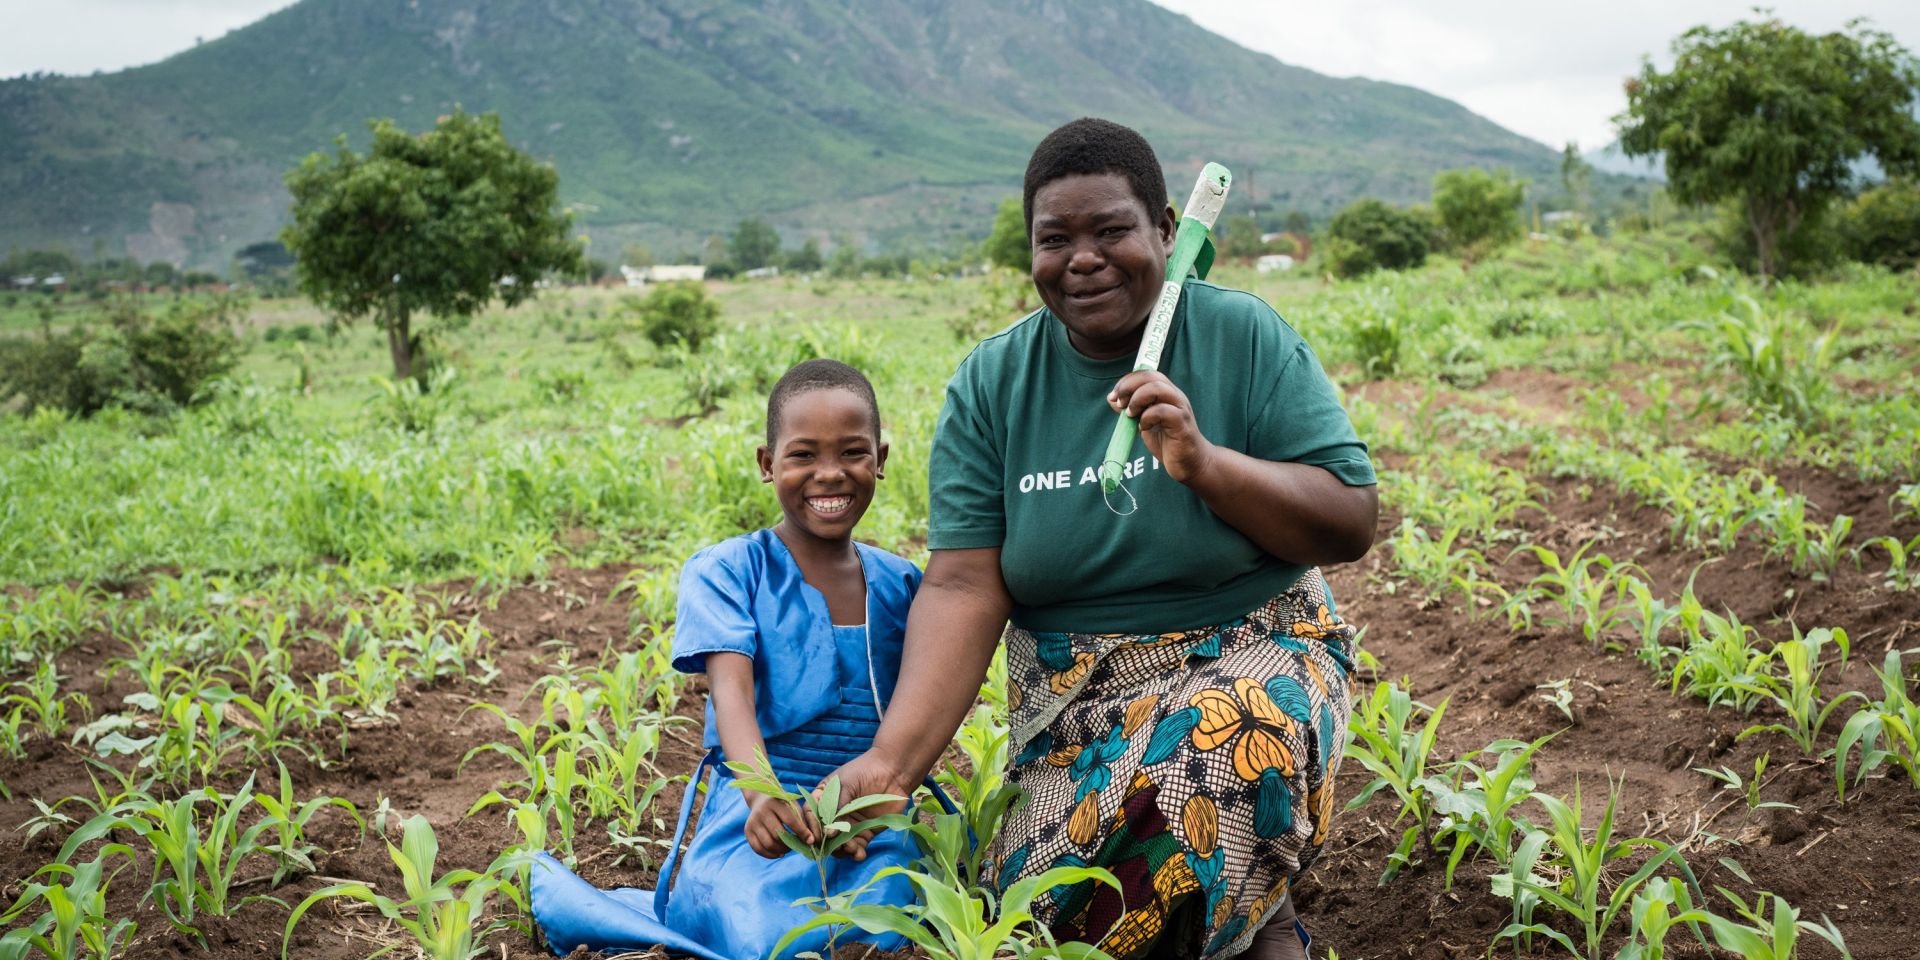 Yvonne Philip and her daughter Promise in Chiradzulu, Malawi